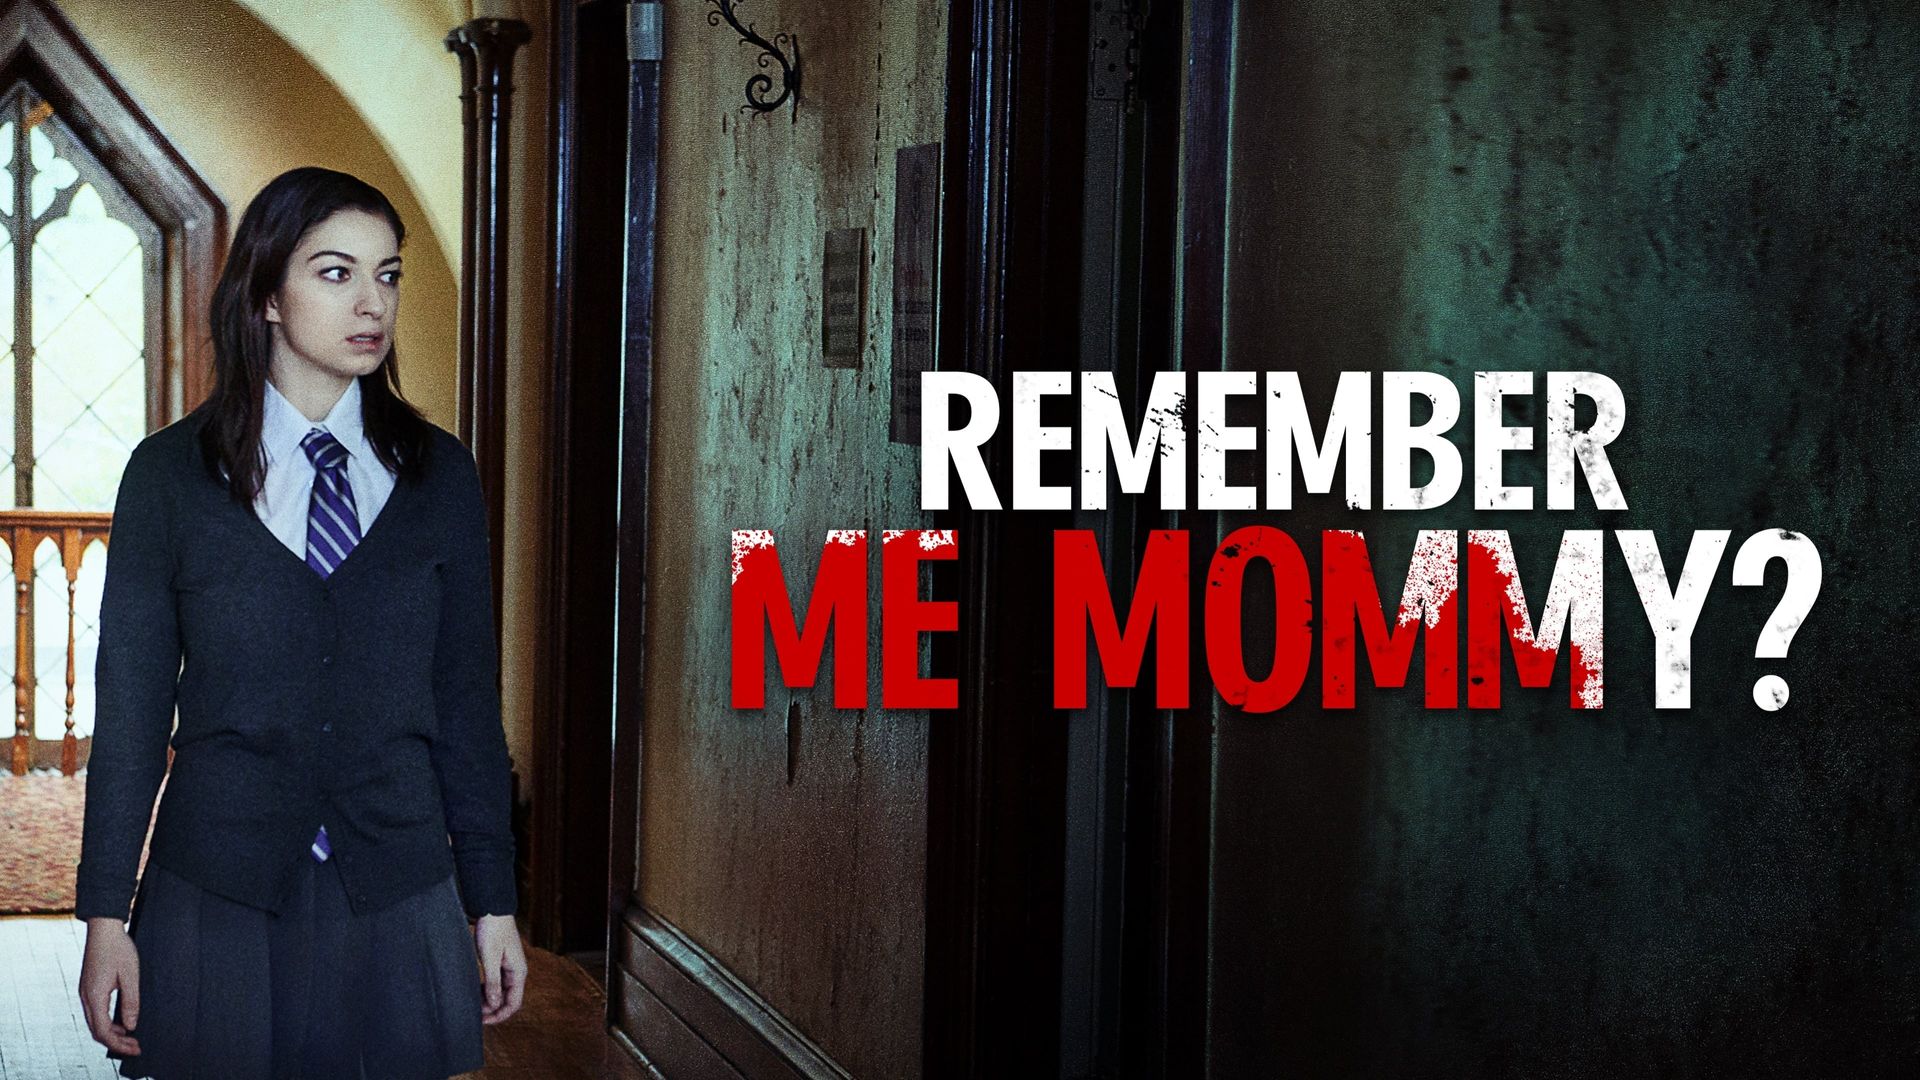 Remember Me, Mommy? background